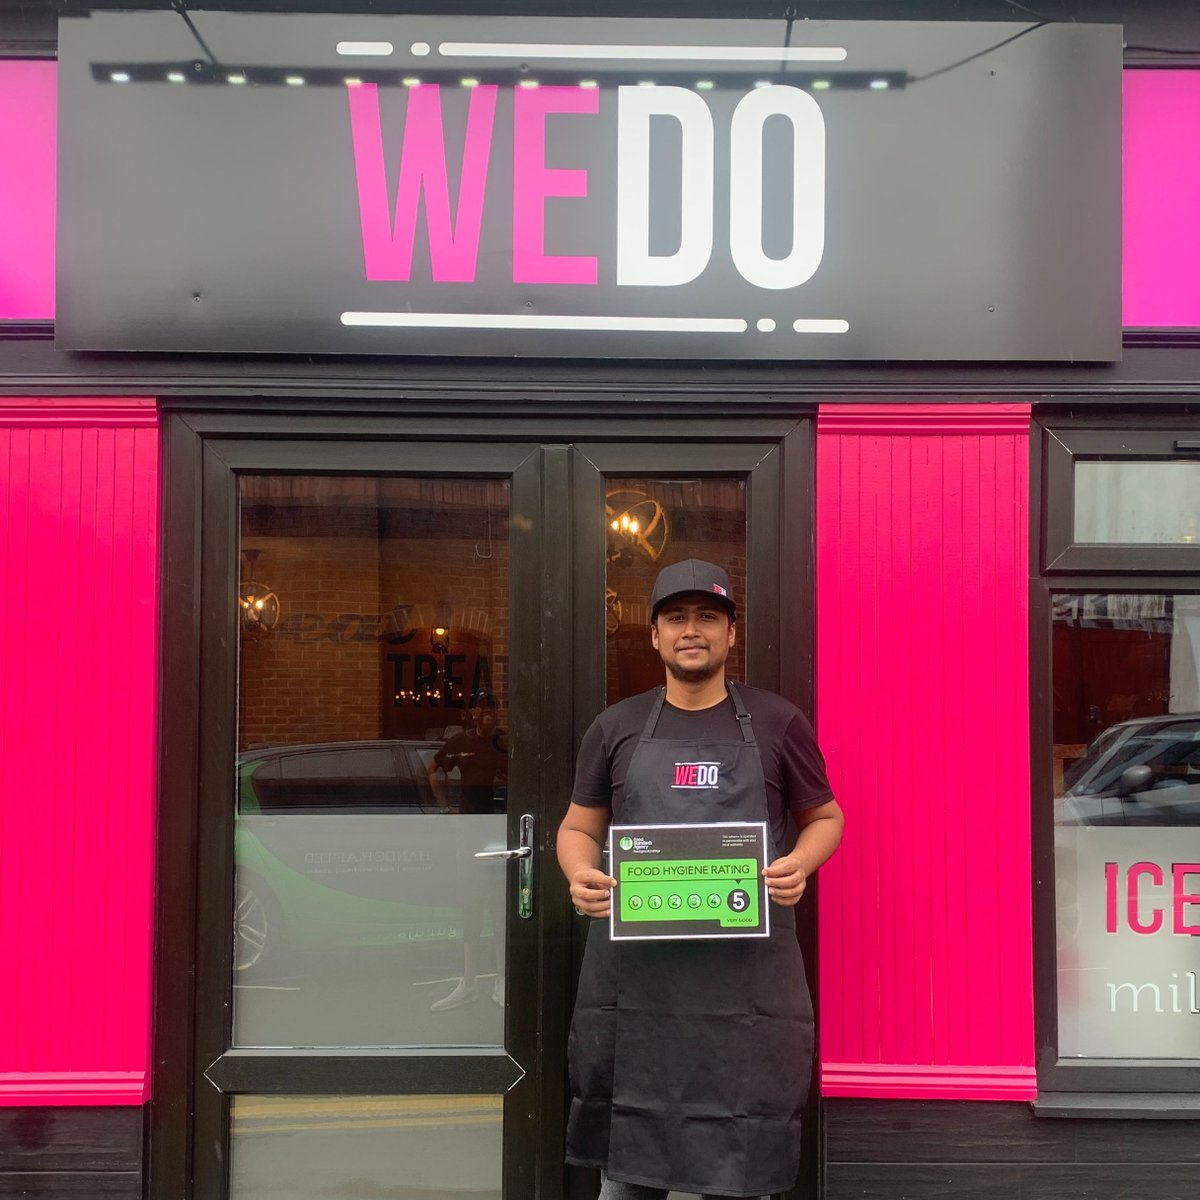 Well done to the teams at Burger Boys, Sushi Daily and We Do Treats for achieving ratings of 5 following their recent food hygiene inspections! ⭐️ @CheltenhamBC